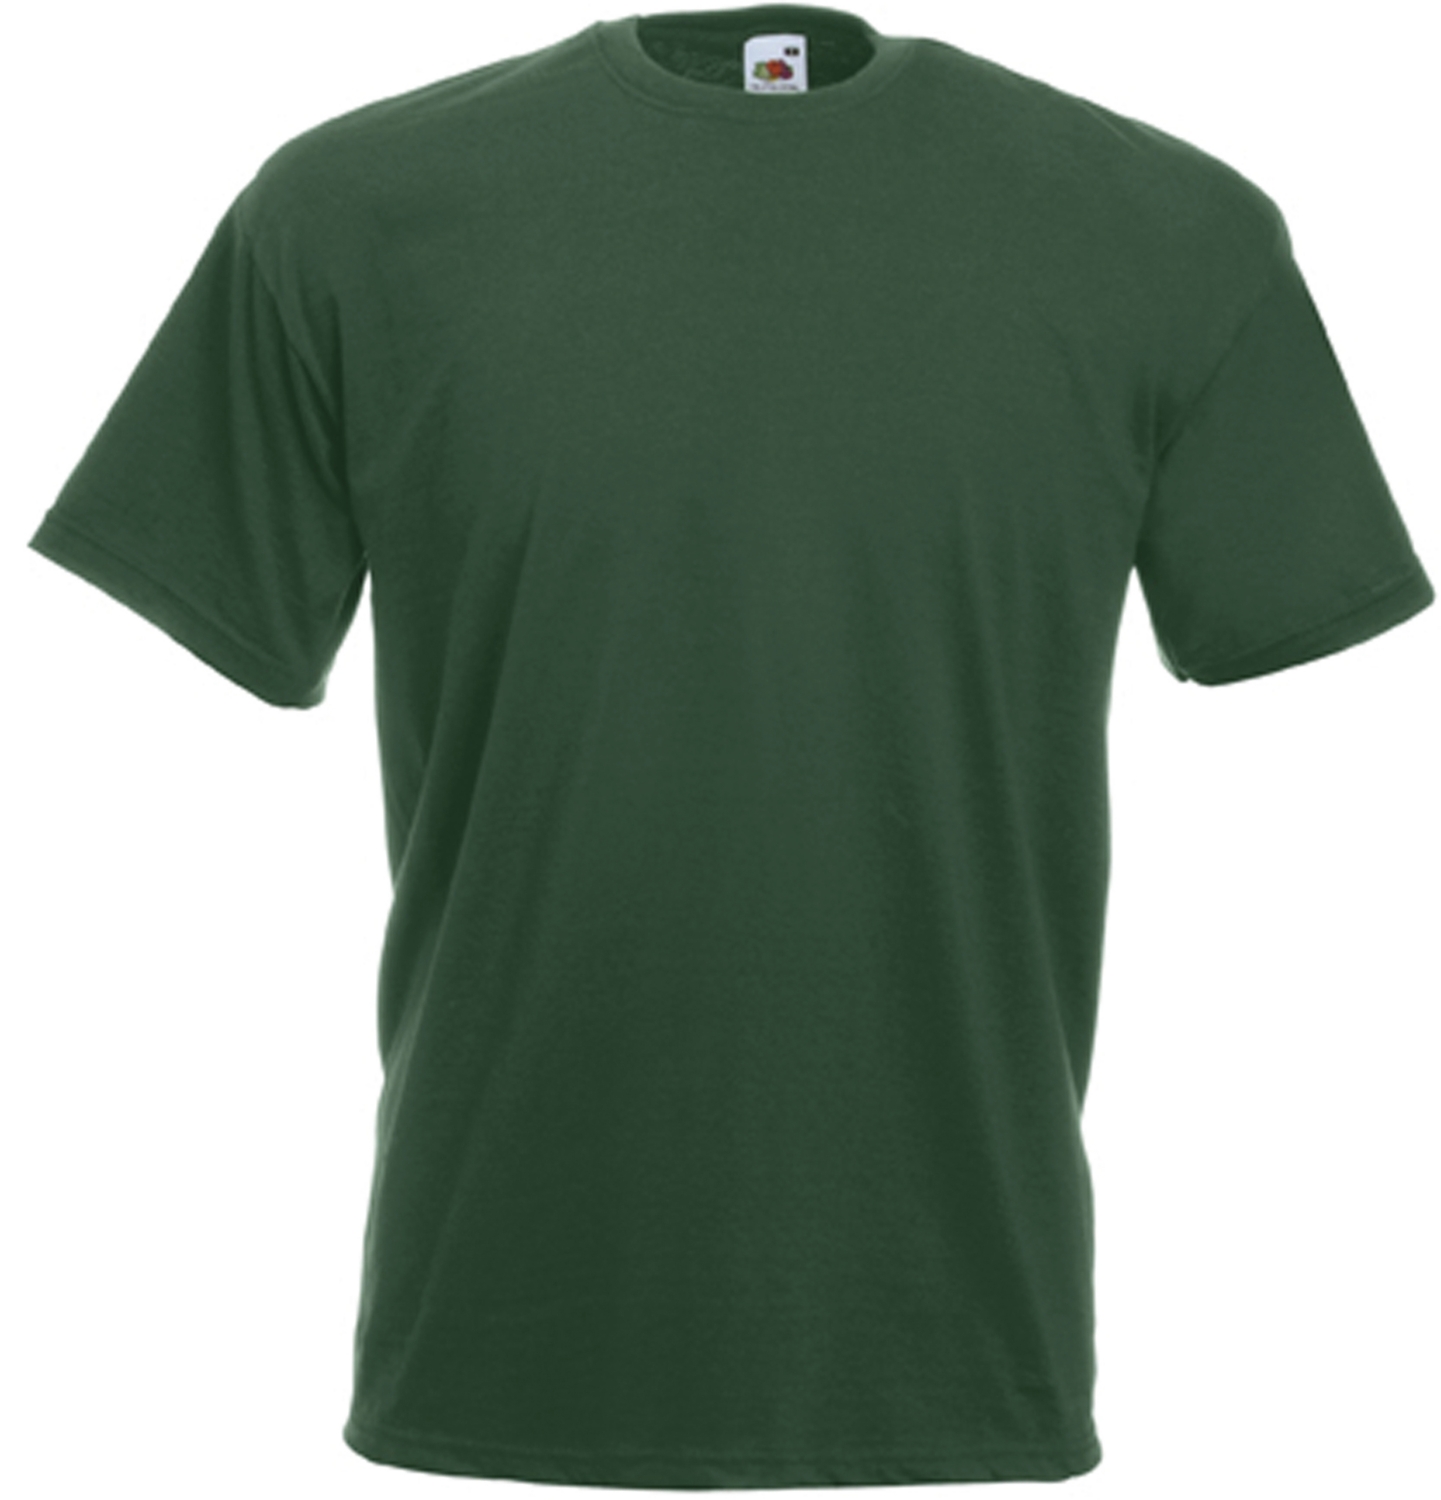 Tee-shirt Value-Weight - Vert bouteille Fruit Of The Loom